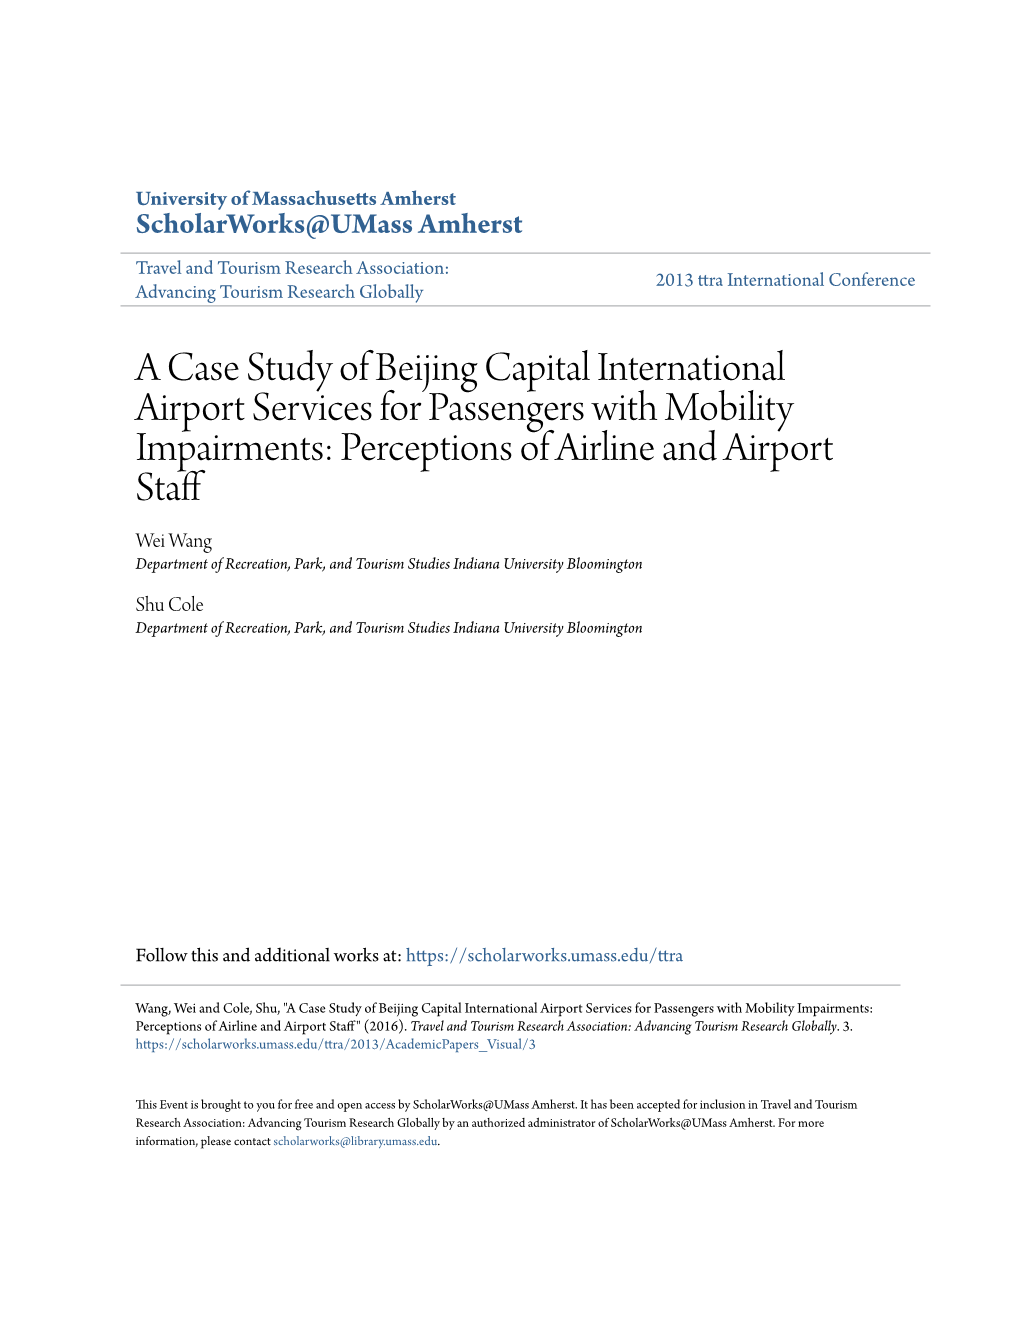 A Case Study of Beijing Capital International Airport Services For